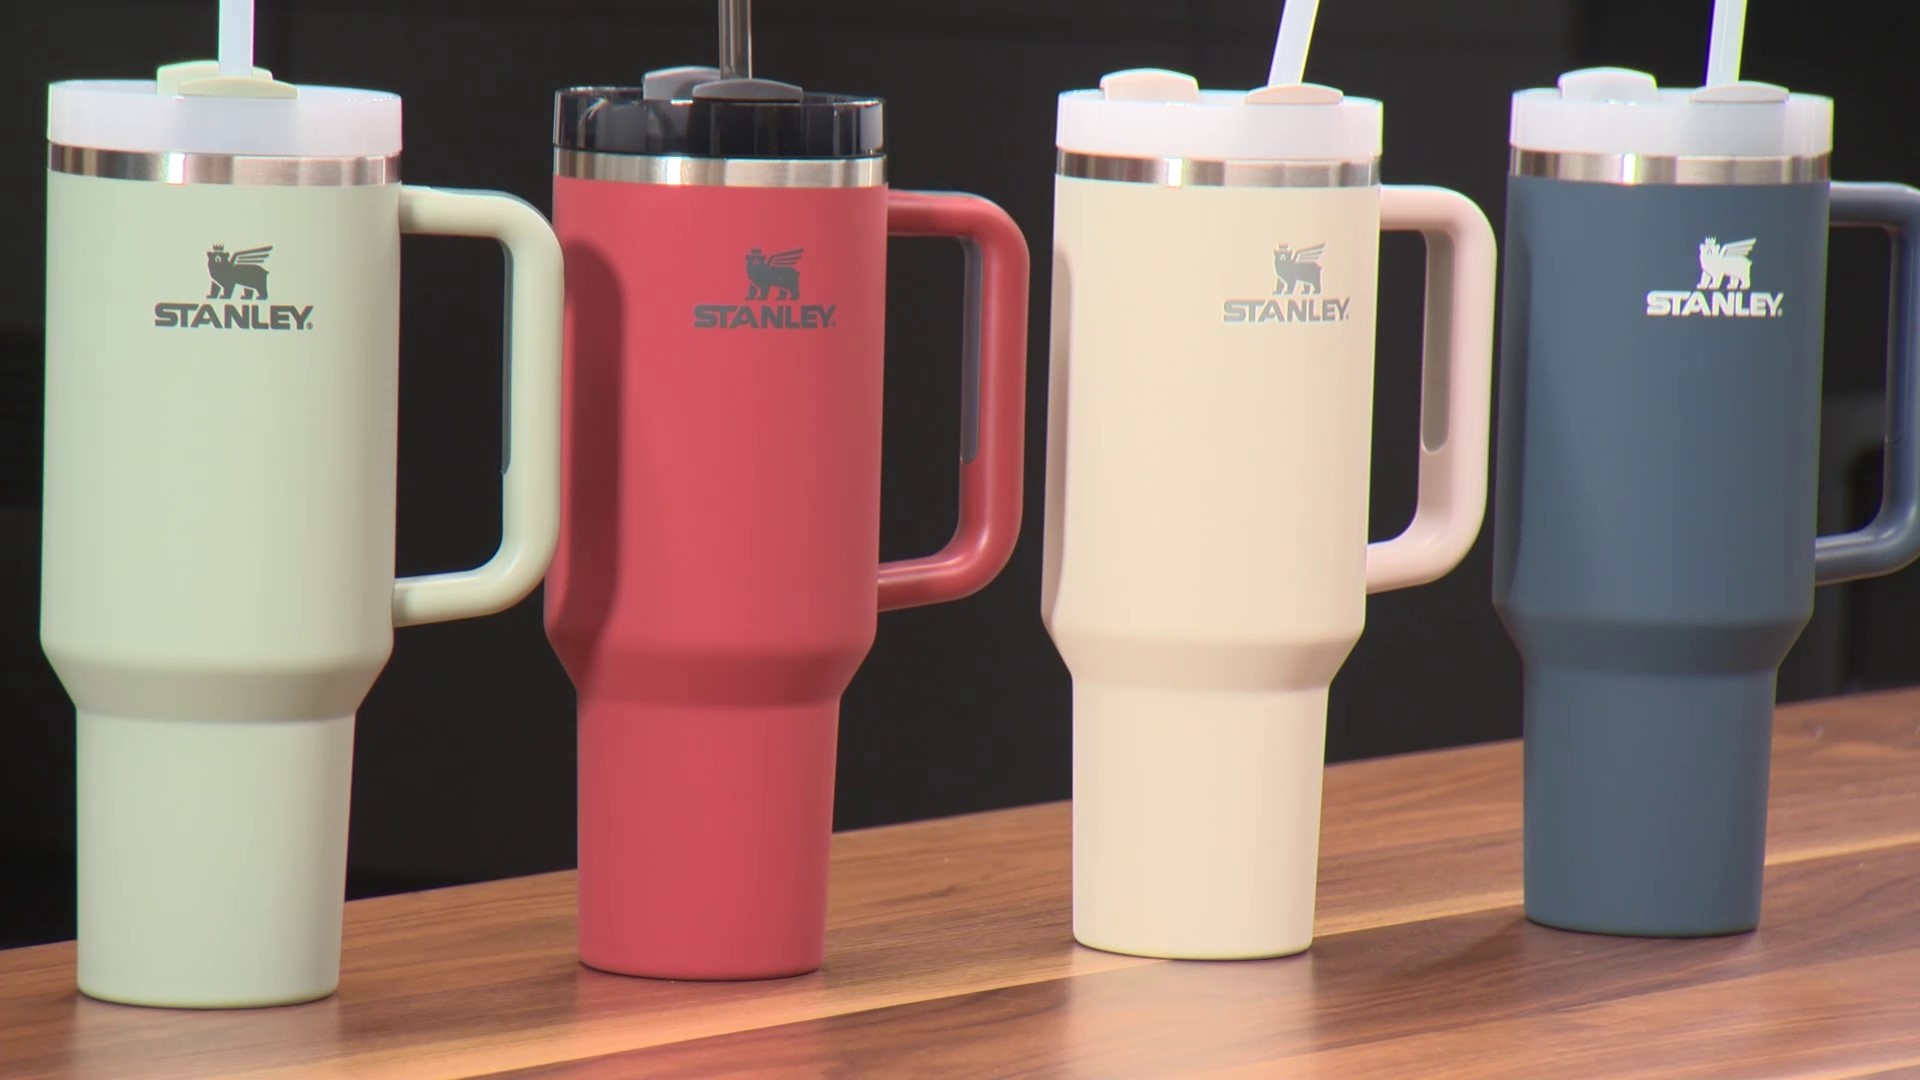 Stanley has been around since 1913 — now they have a product that's TikTok famous. #k5evening